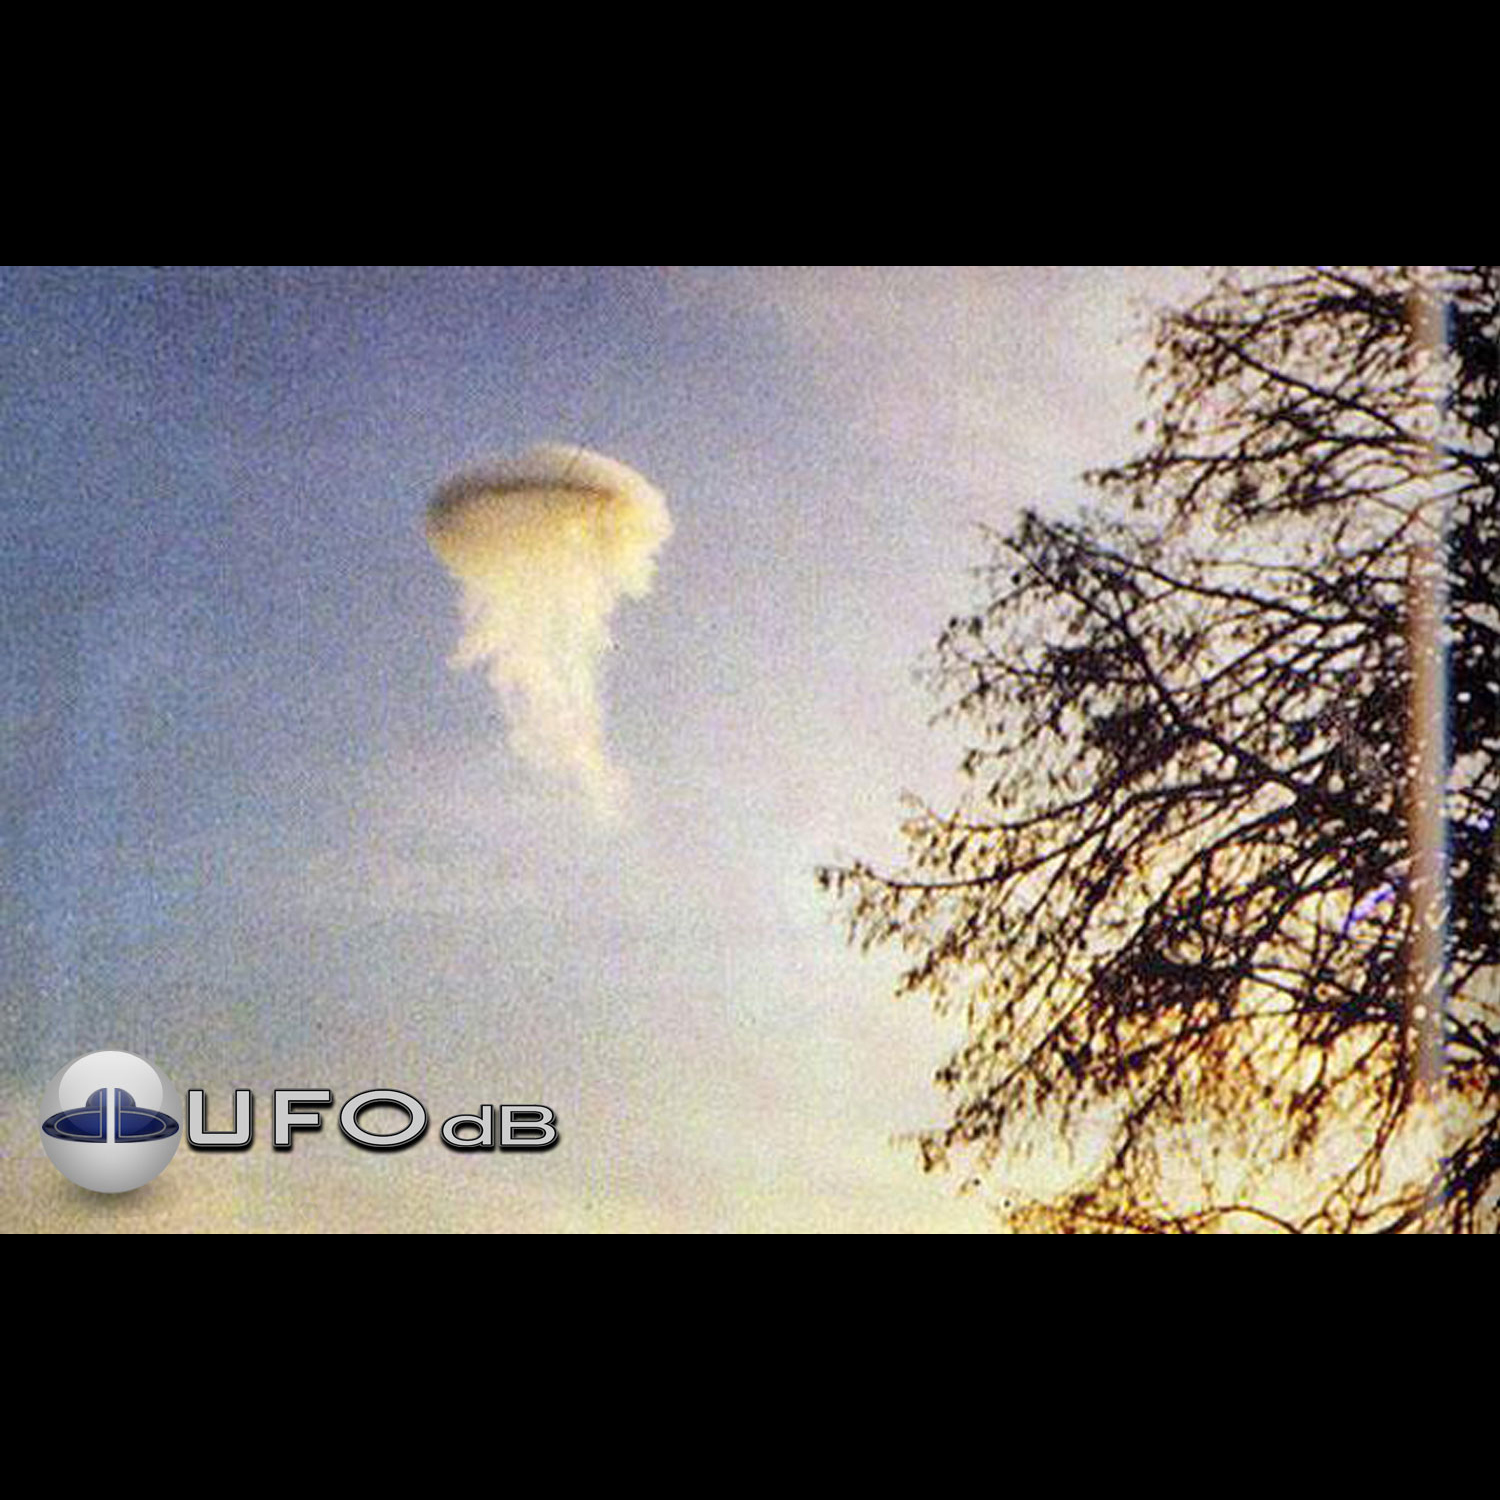 Best UFO picture showing UFO in Cloud disguise | Viborg, Denmark 1974 UFO Picture #222-1